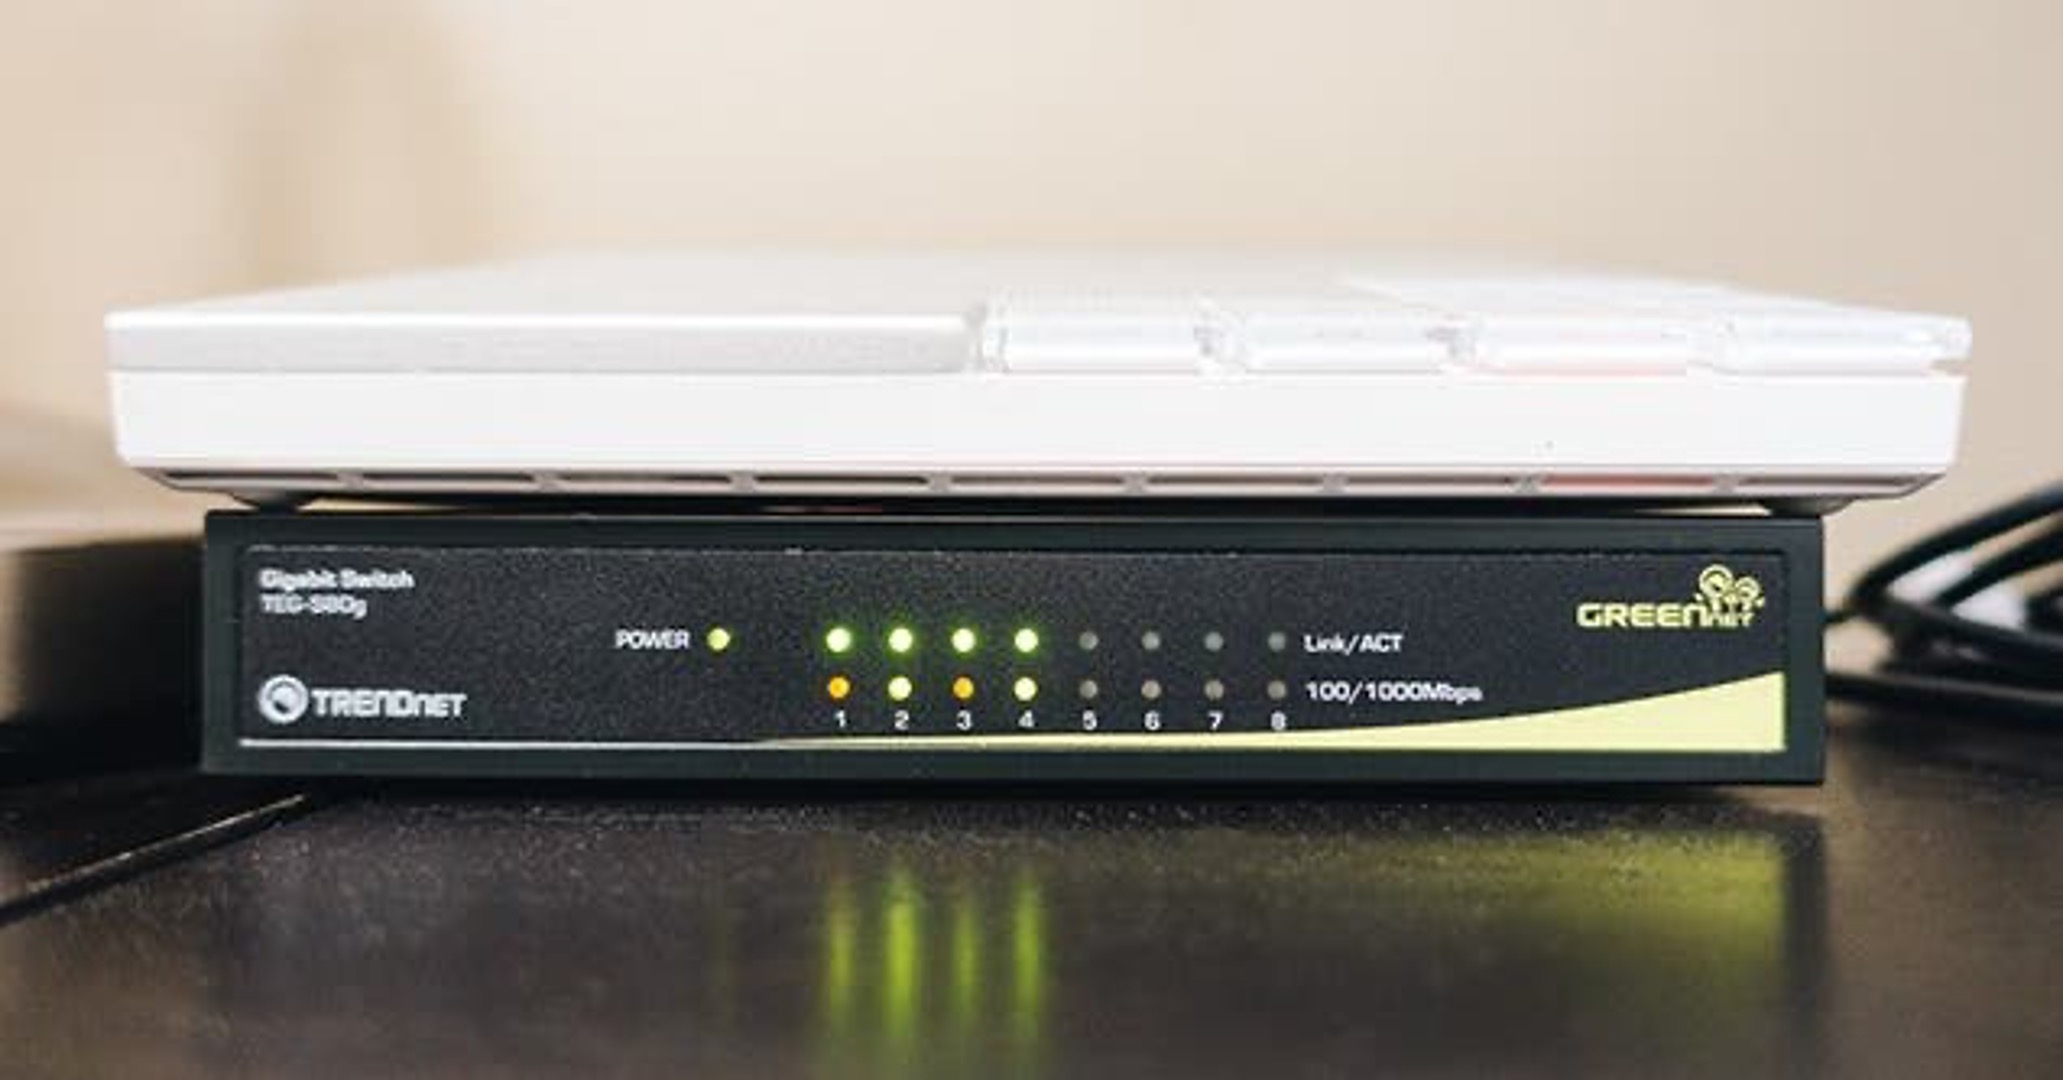 How To Power A Network Switch Without An Outlet